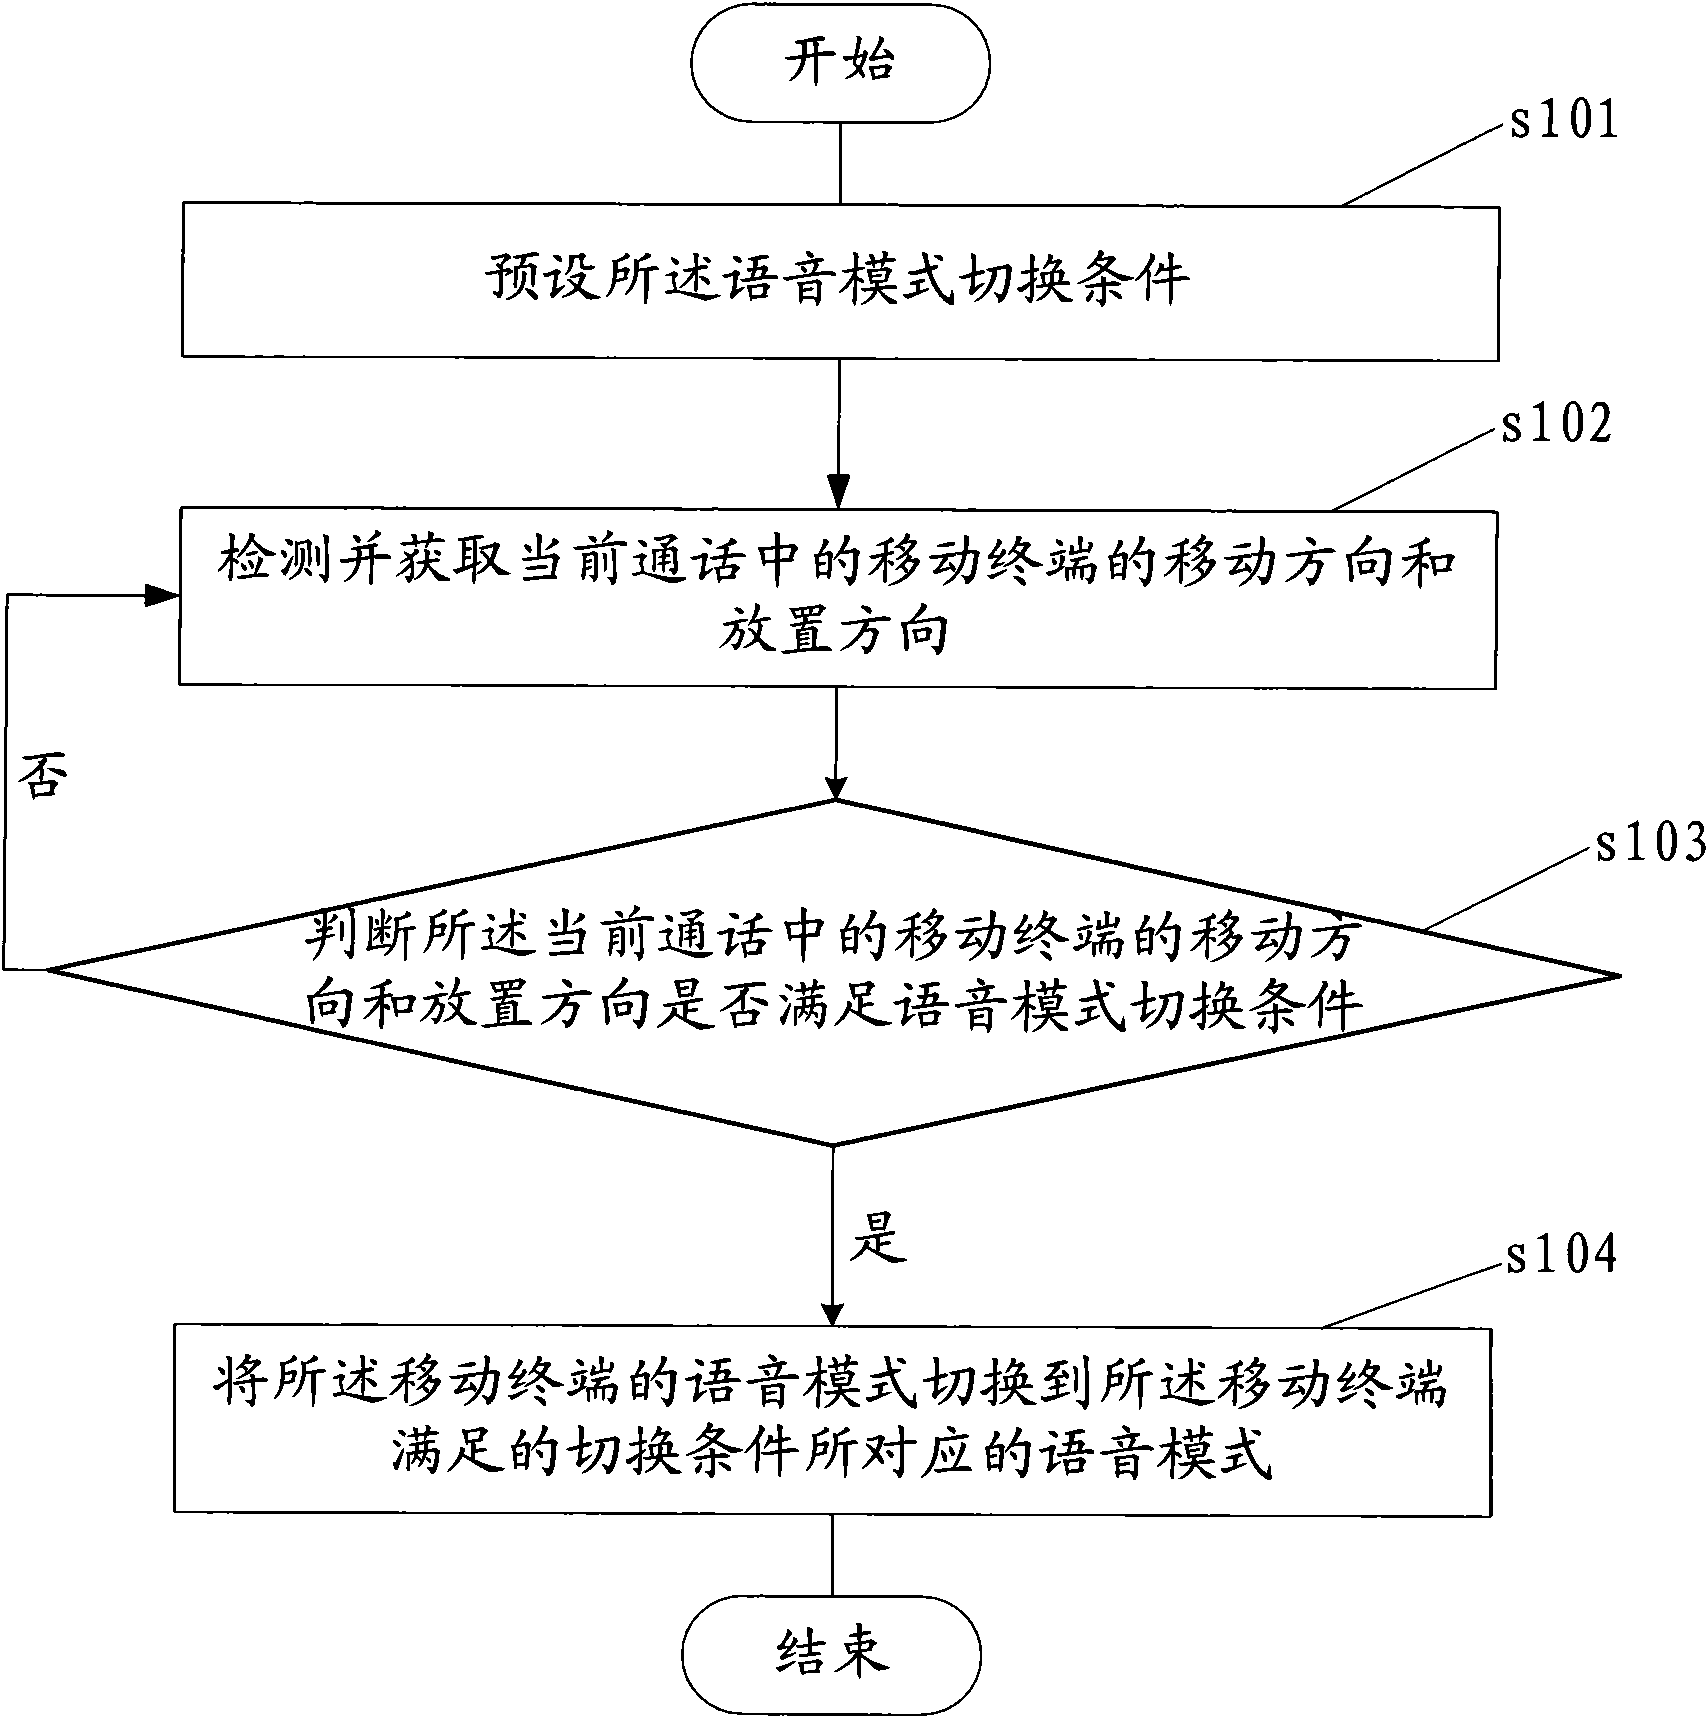 Mobile terminal, method and system for automatically switching speech patterns